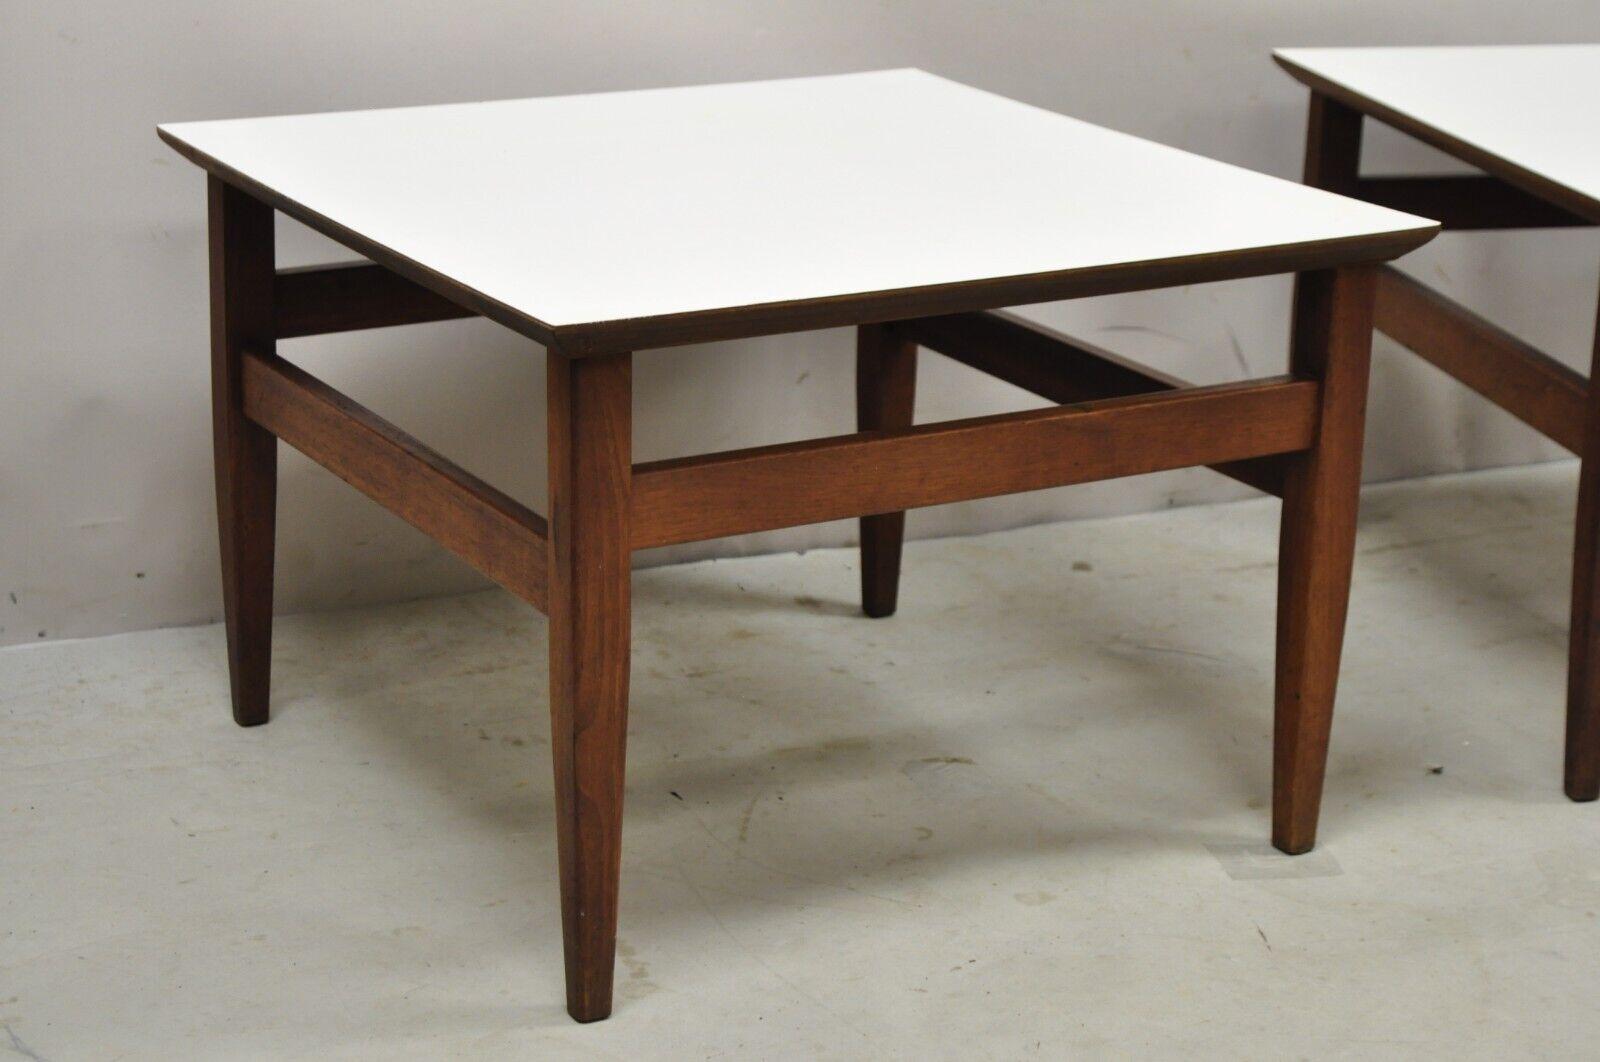 Laminated Vintage Mid Century Walnut Base Laminate Top Low Side Tables - a Pair For Sale